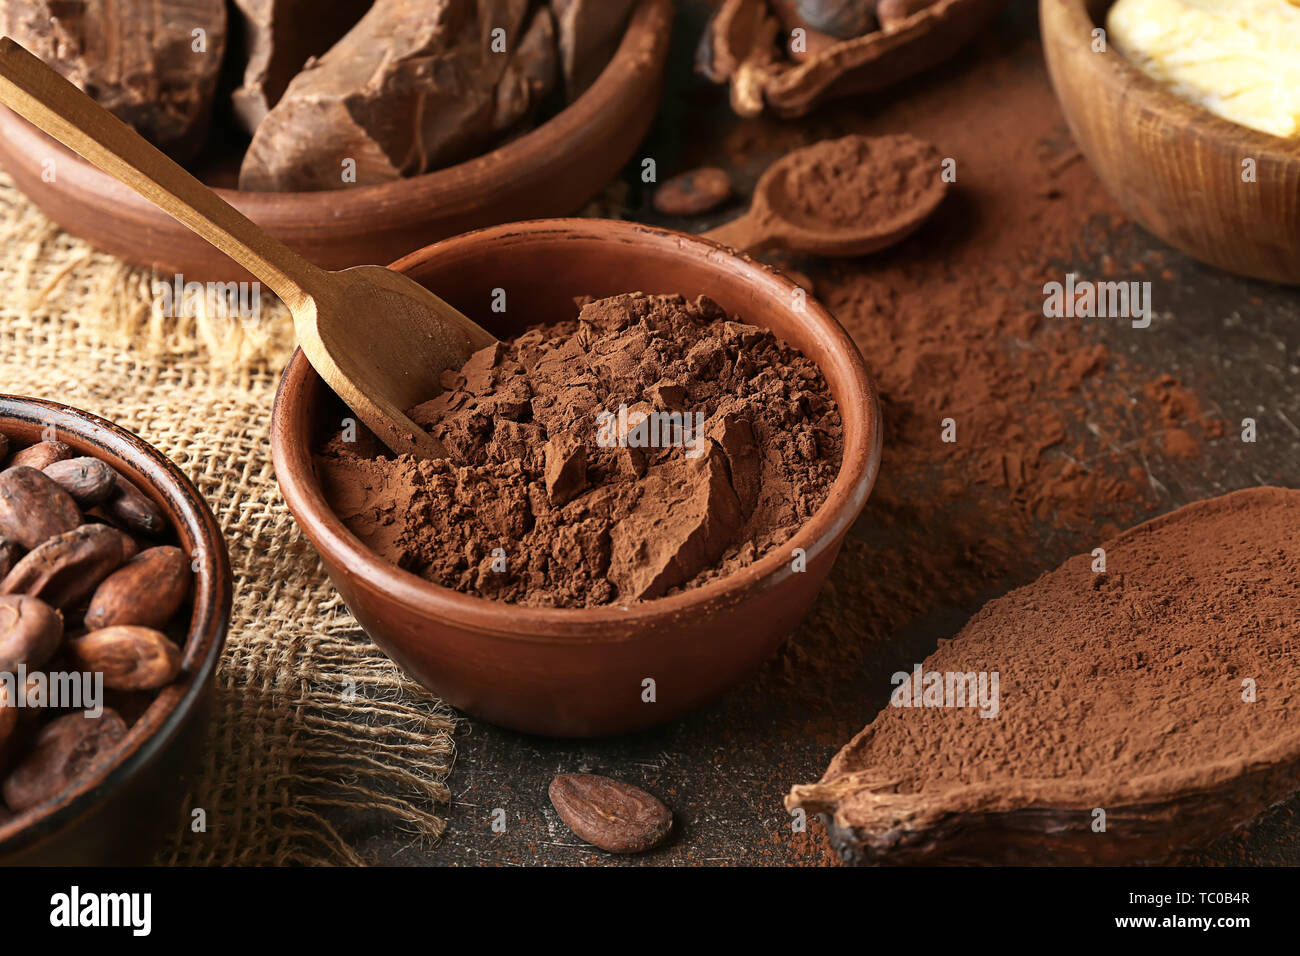 Bowl with cocoa powder on table Stock Photo